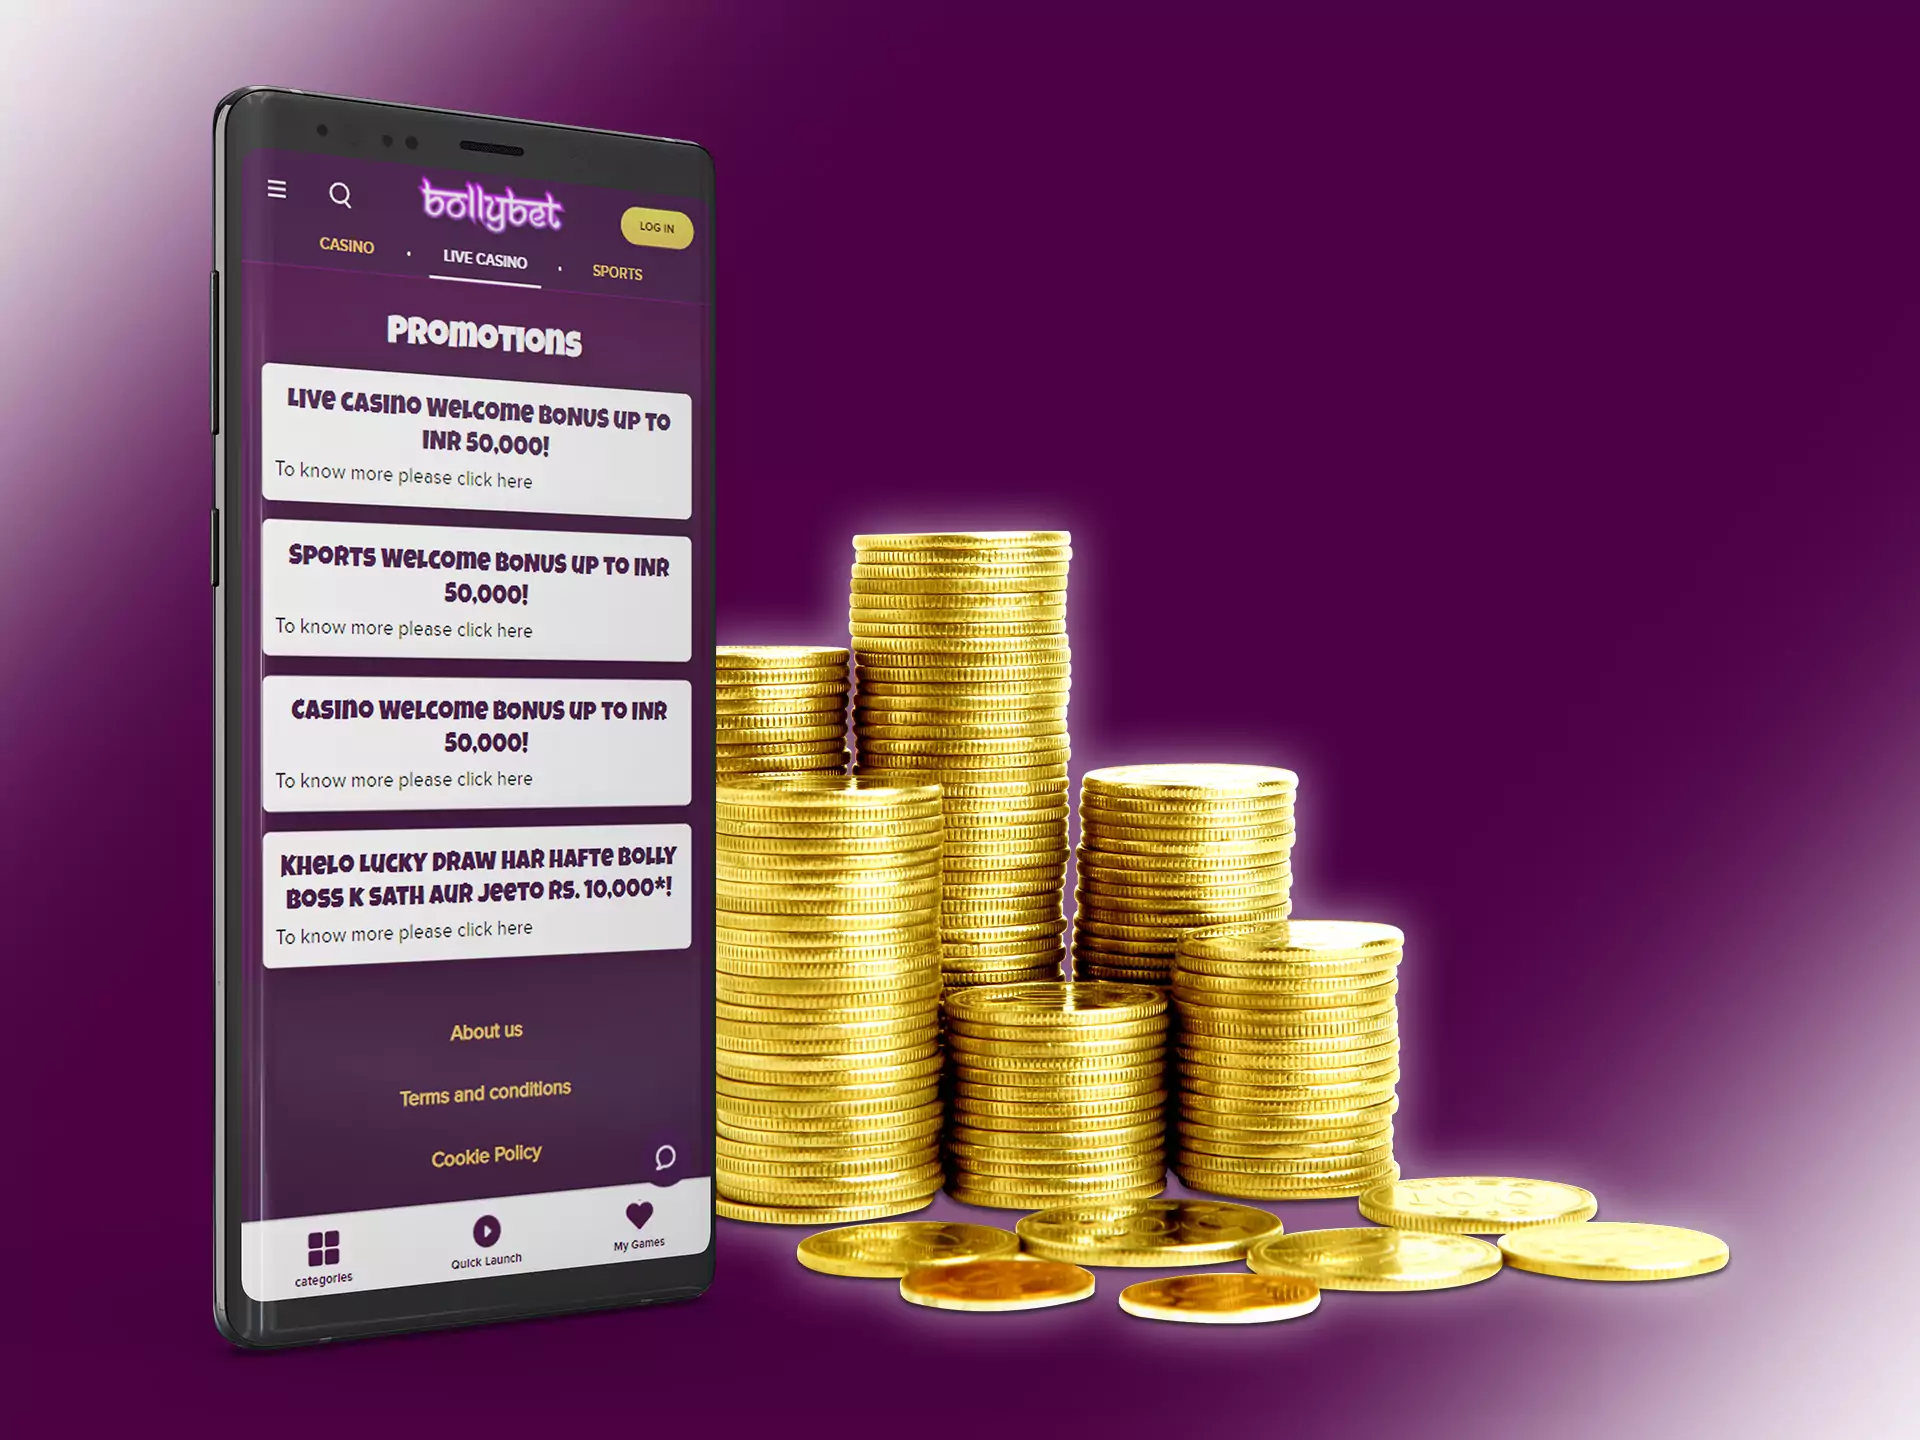 Bollybet mobile users get a welcome bonus.